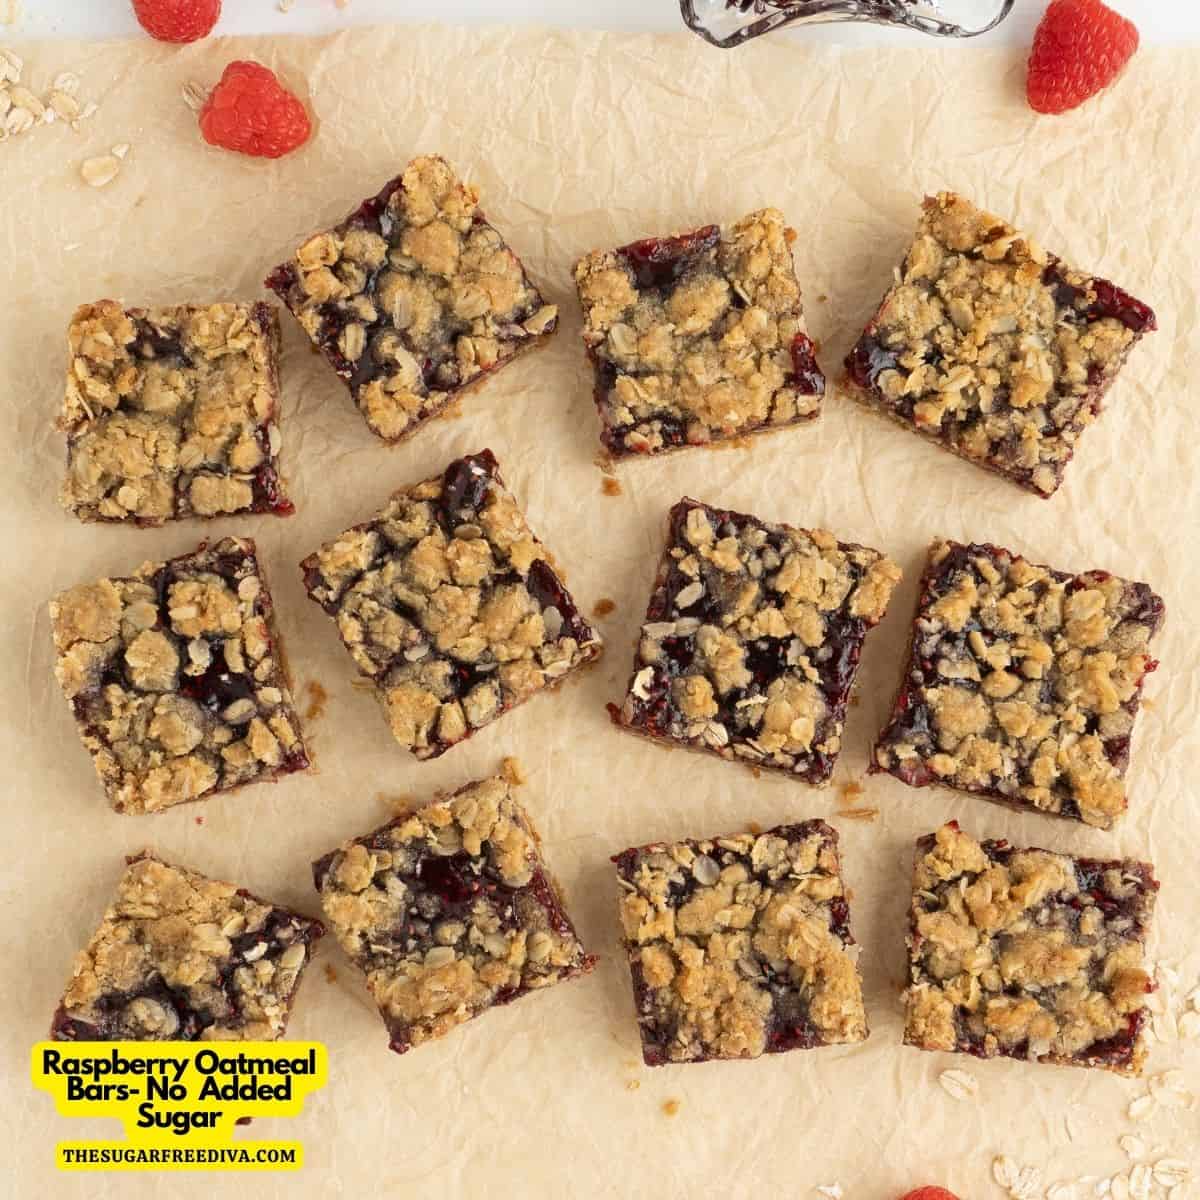 Raspberry Oatmeal Bars- A simple and delicious dessert bar recipe made with oats and raspberry preserves with no added sugar.